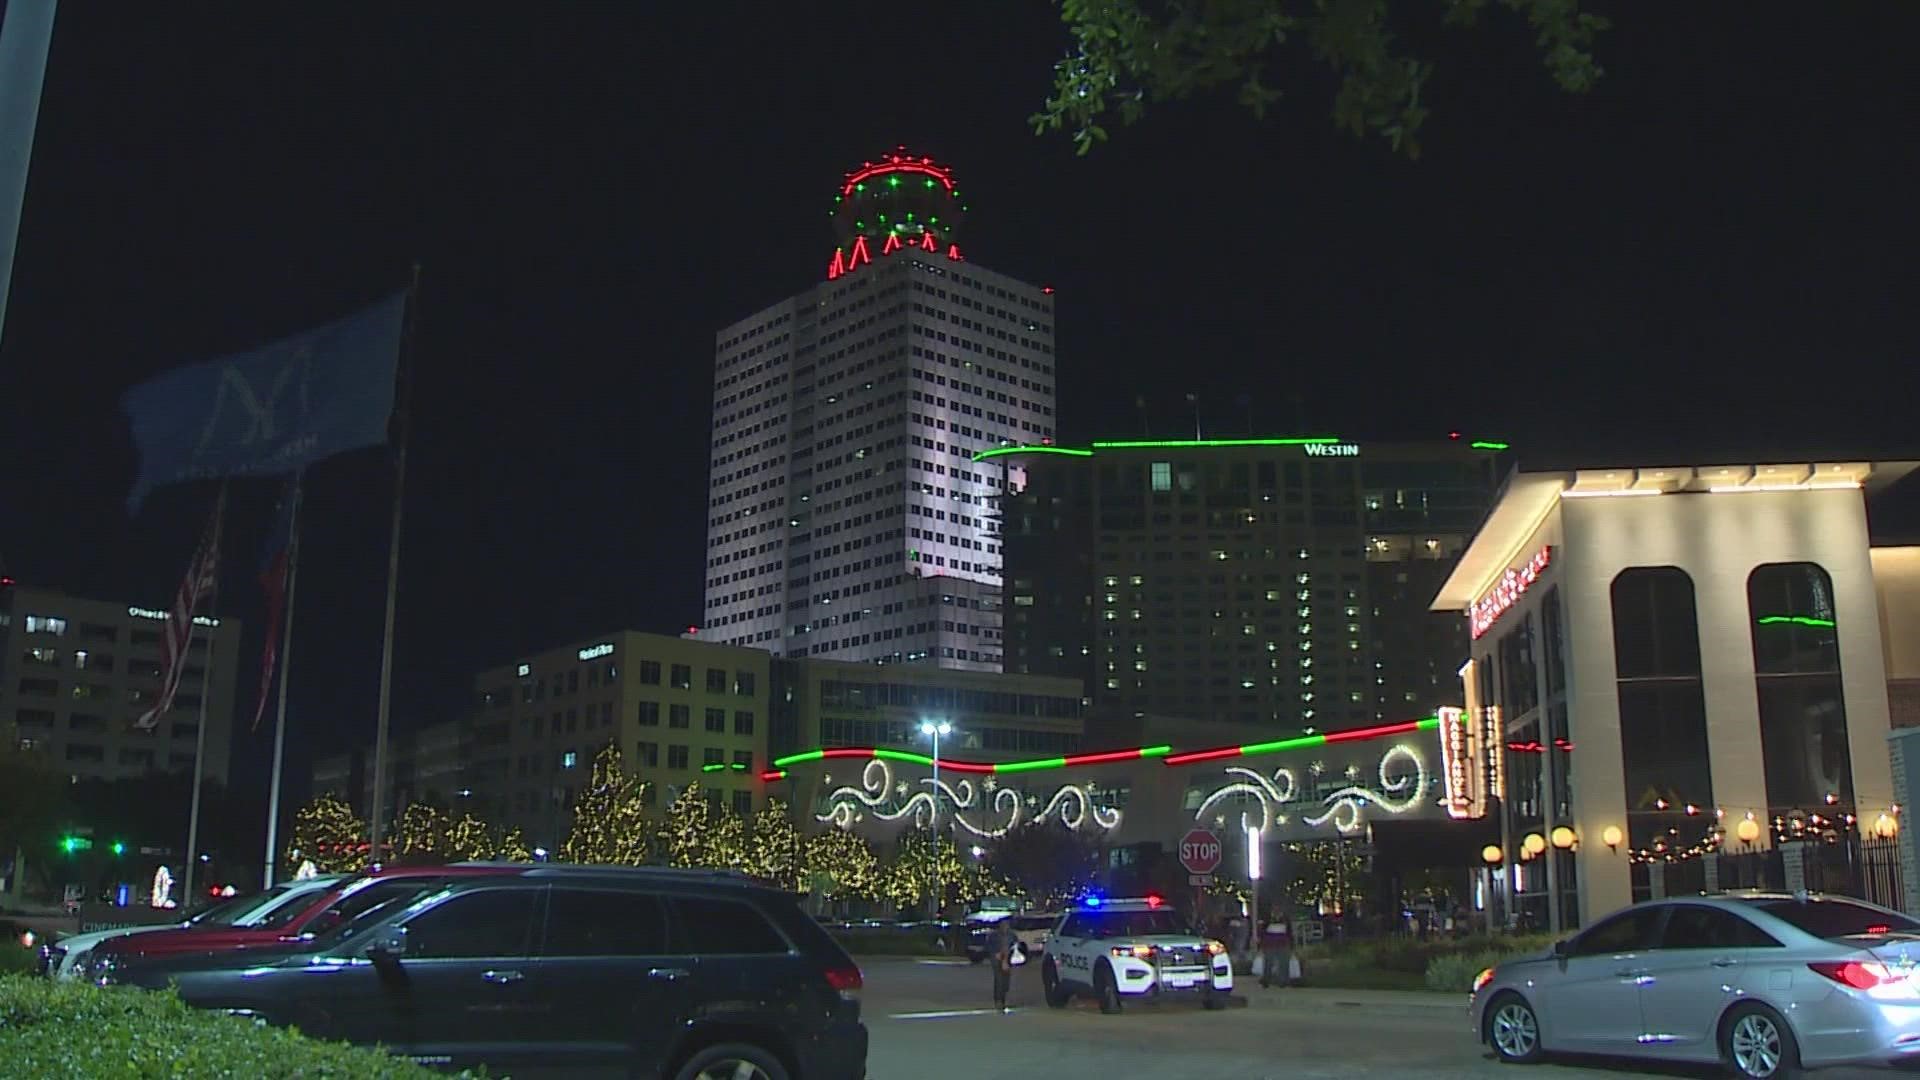 Winter events took over the Houston area on Saturday.